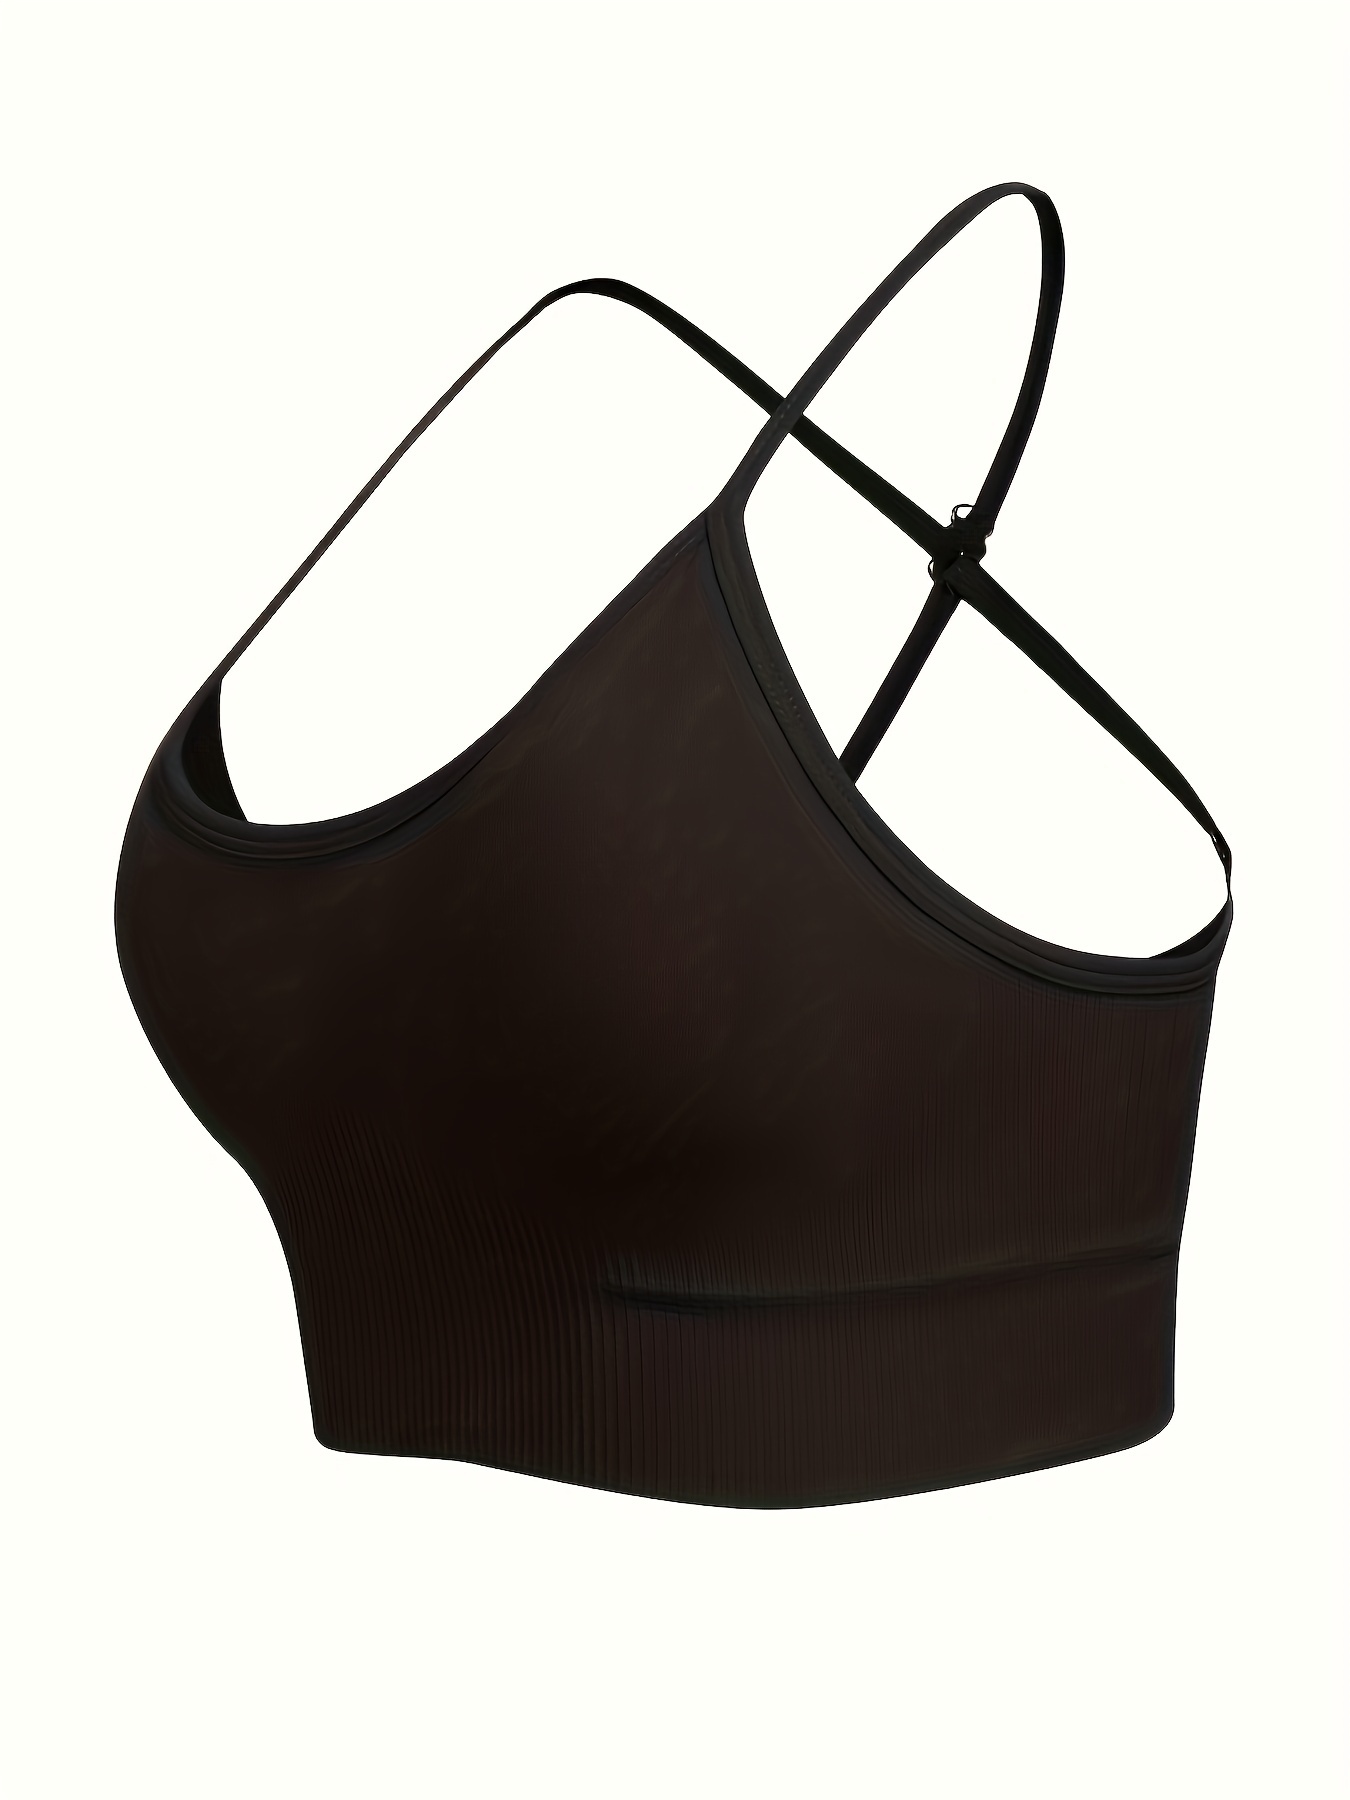 Breathable Criss Cross Gym Top For Women Backless, Seamless 40h Sports Bra  With Push Up Feature J230529 From Baofu003, $10.94